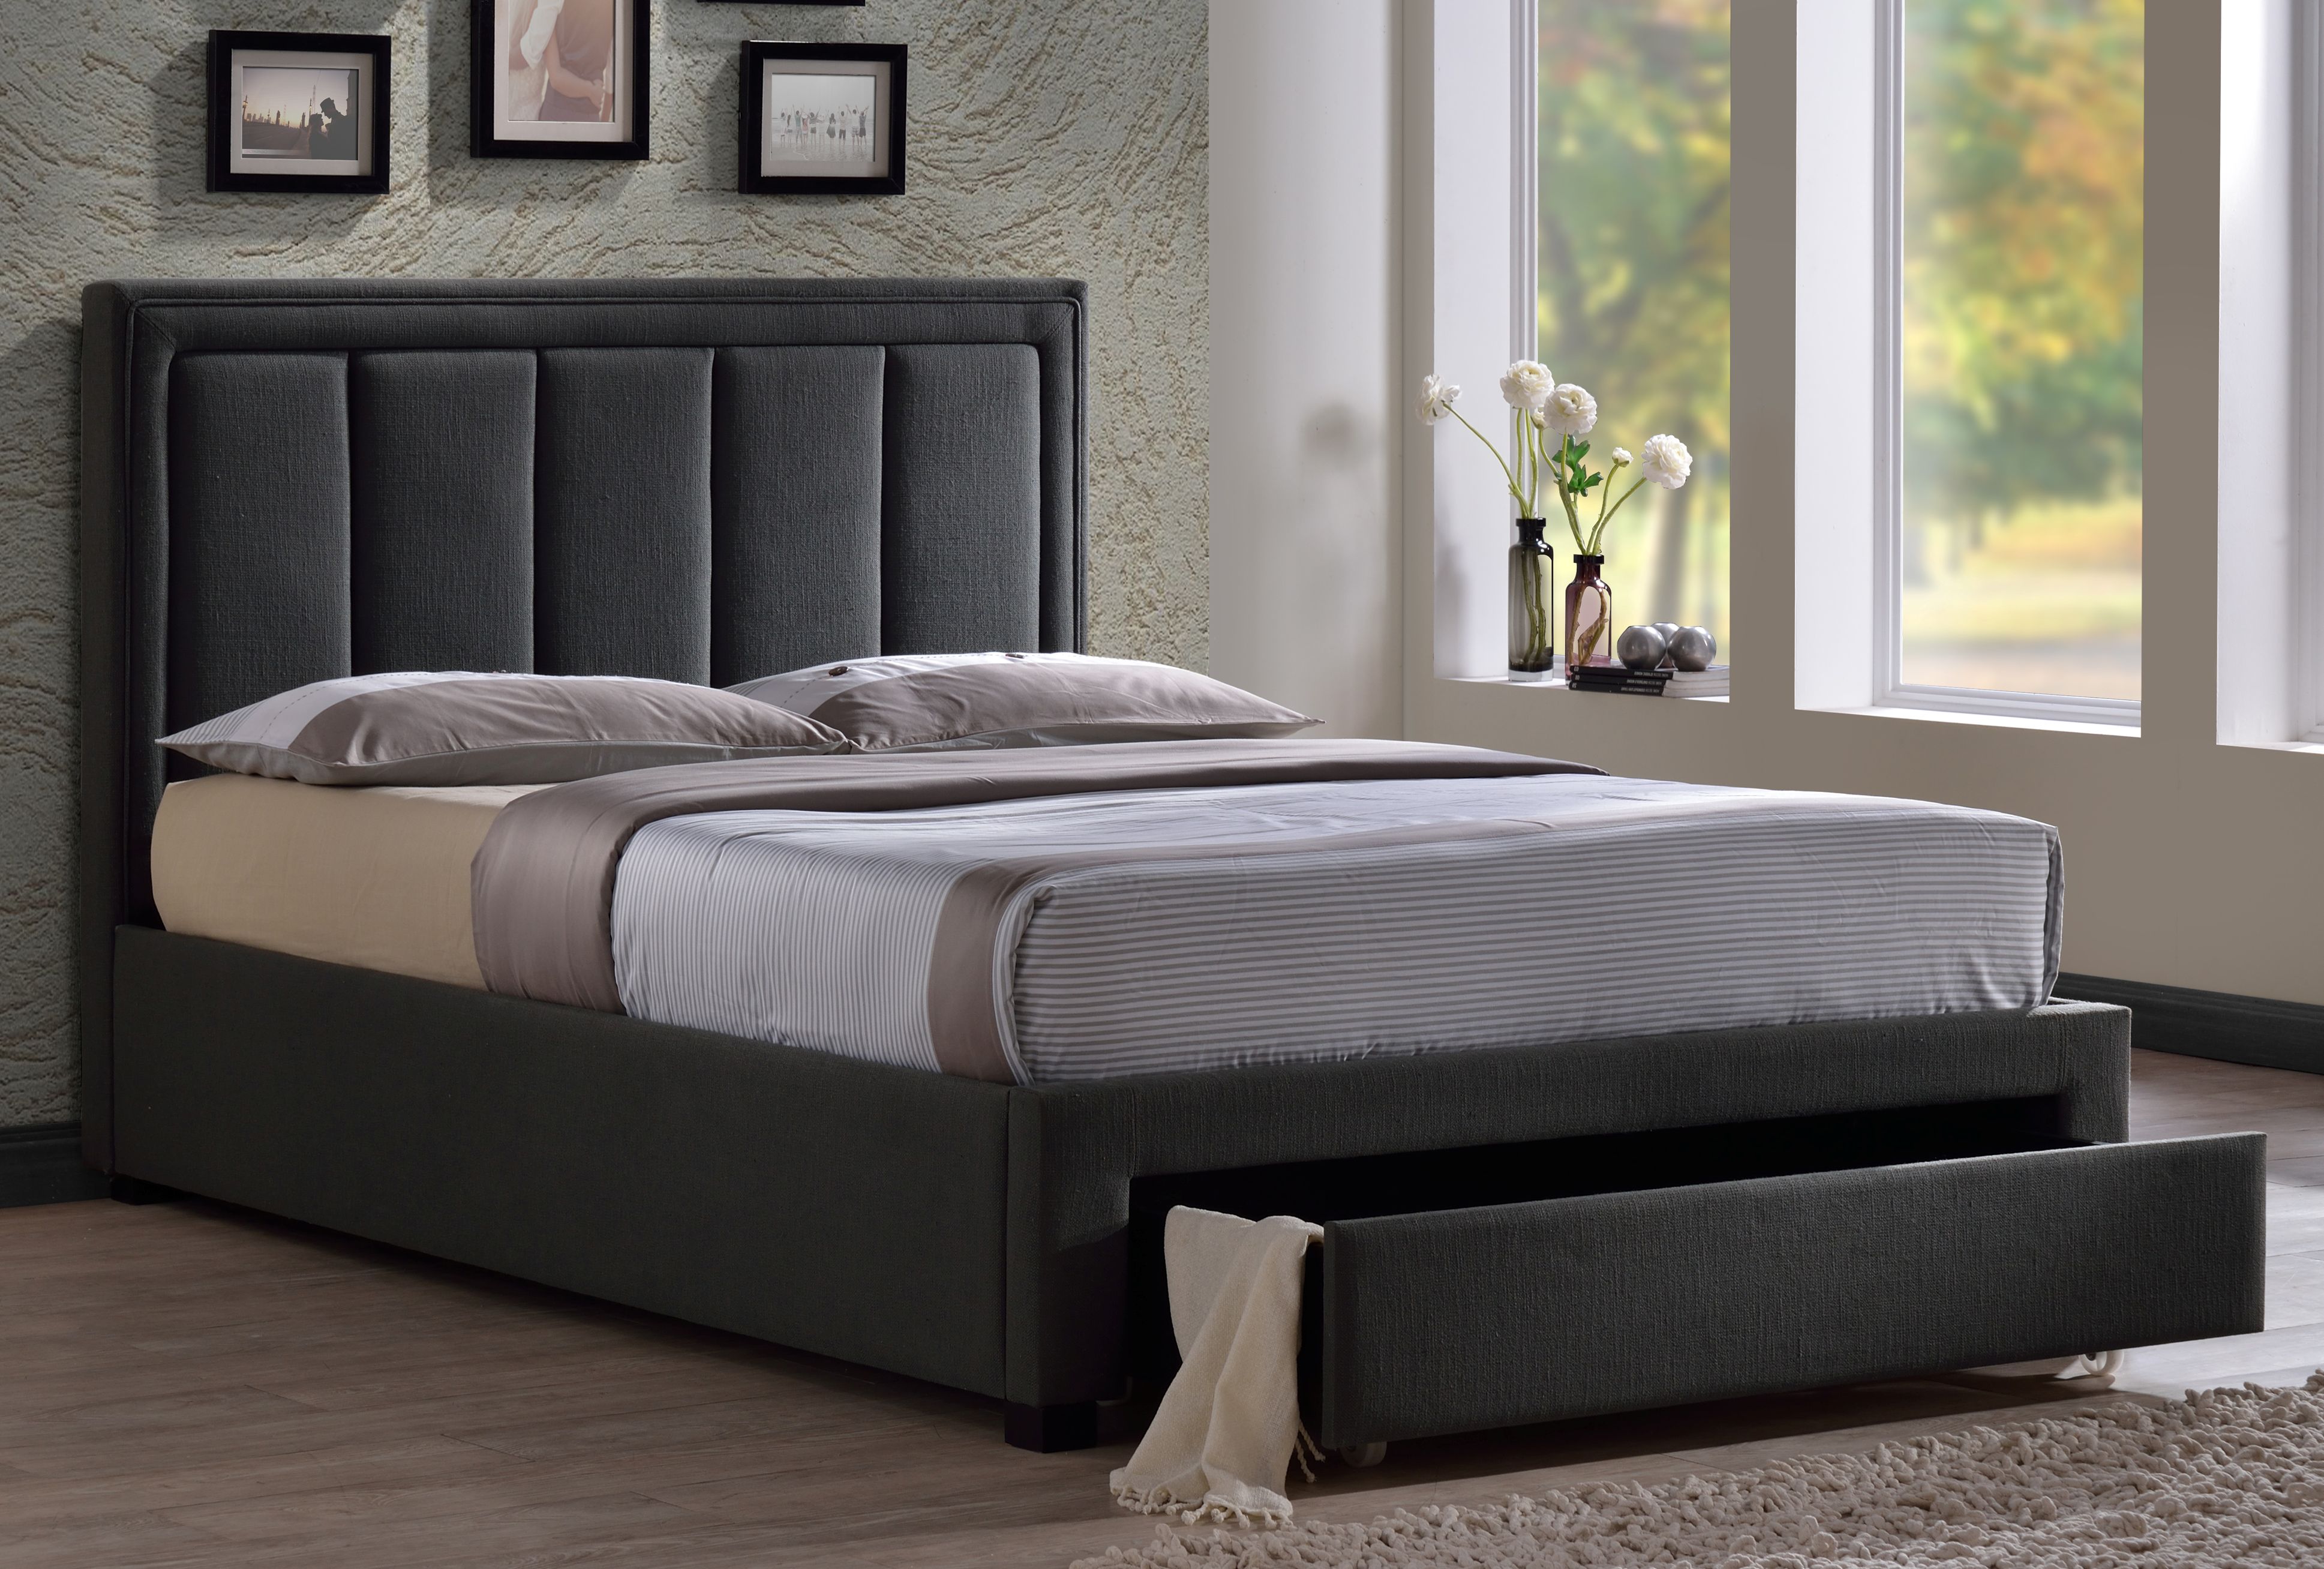 Plush Grey Fabric Bed Frame - King Size 5ft - Free Next Day Delivery*